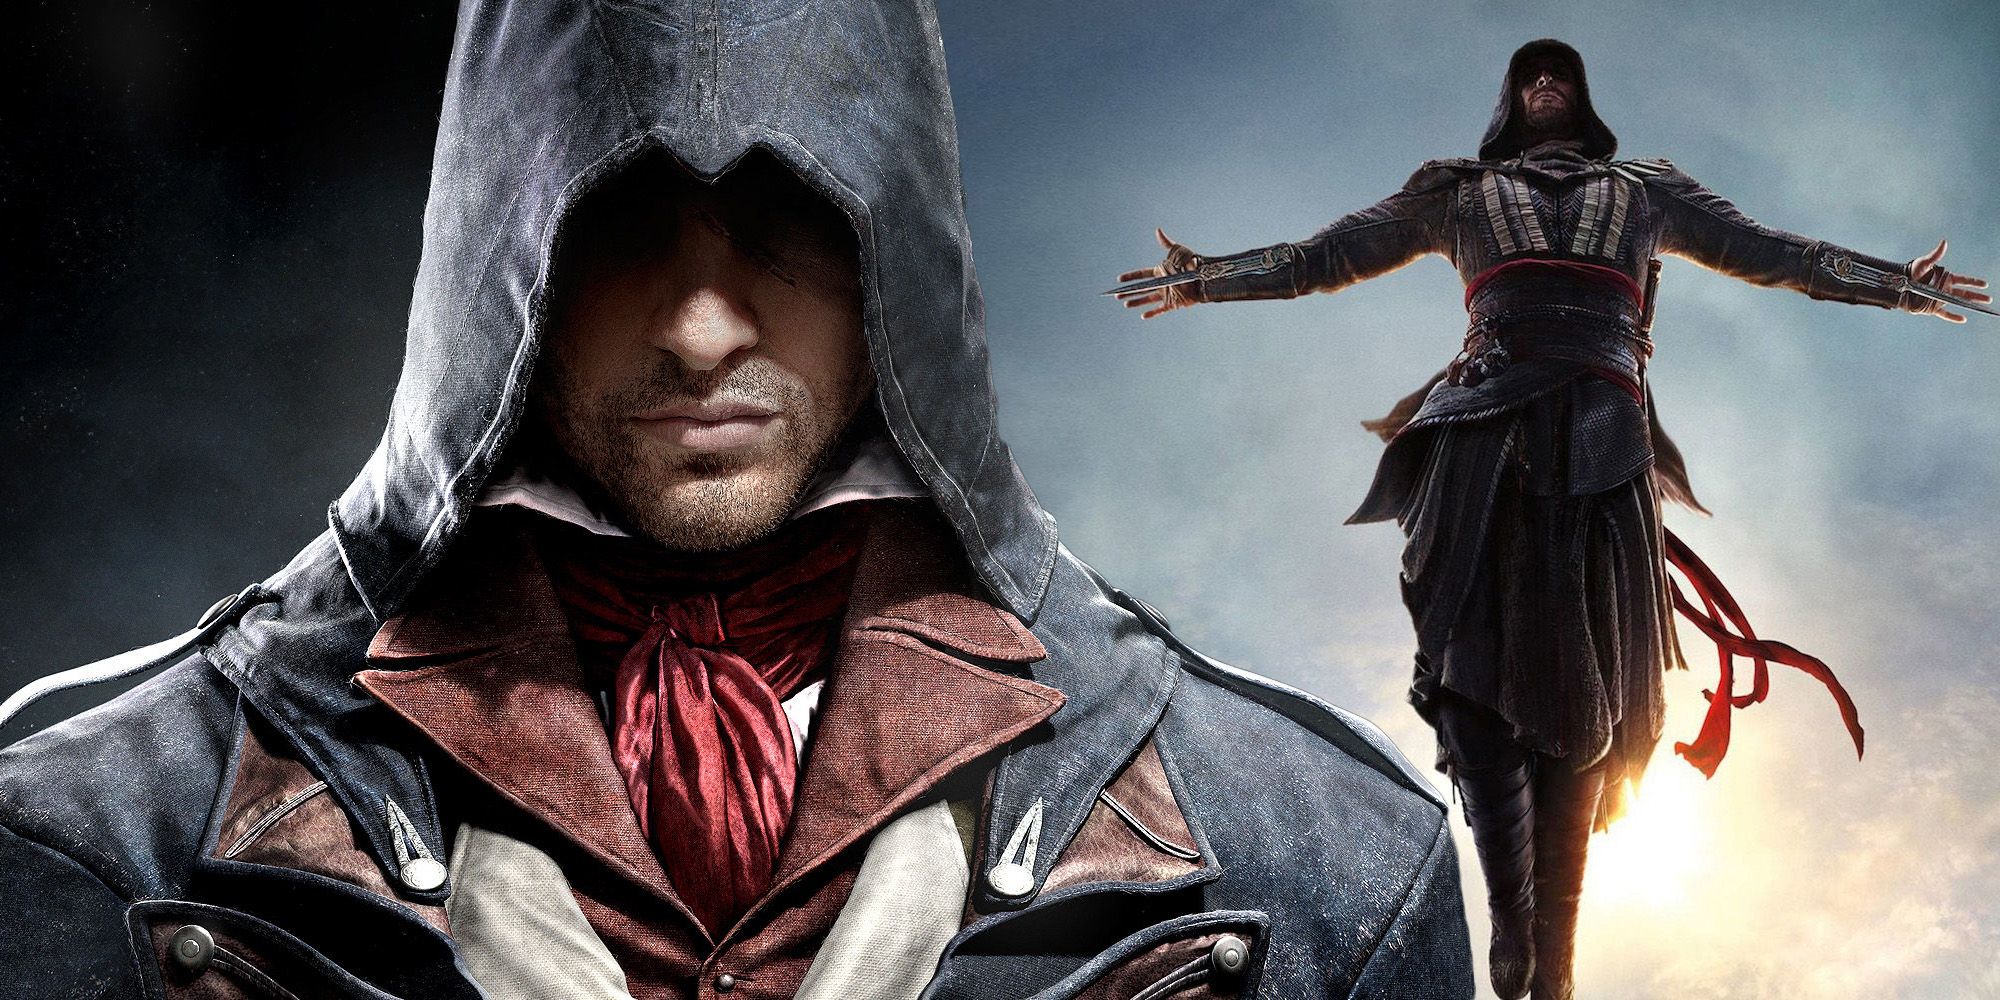 Assassin's Creed shouldn't have been a movie — it should be a TV series